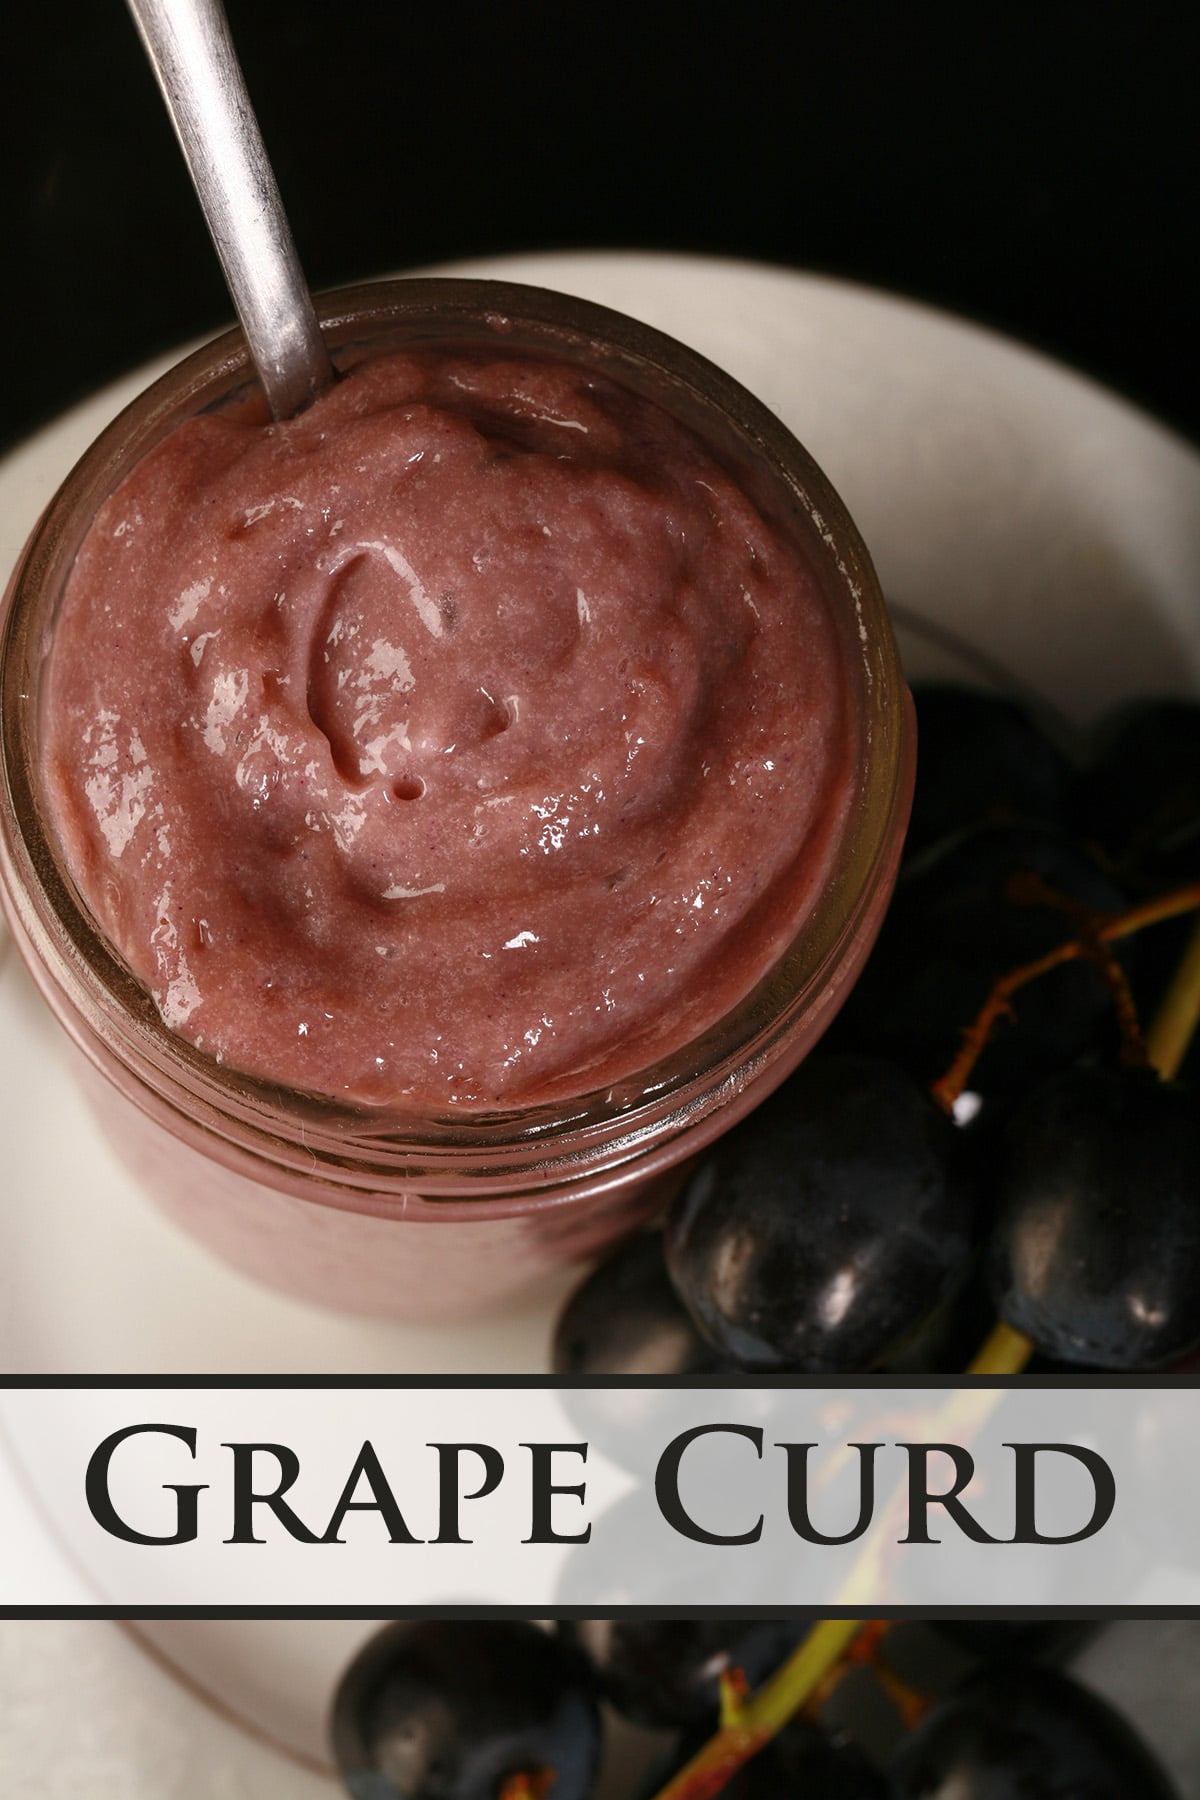 A jar of grape curd on a plate, along with some fresh grapes.